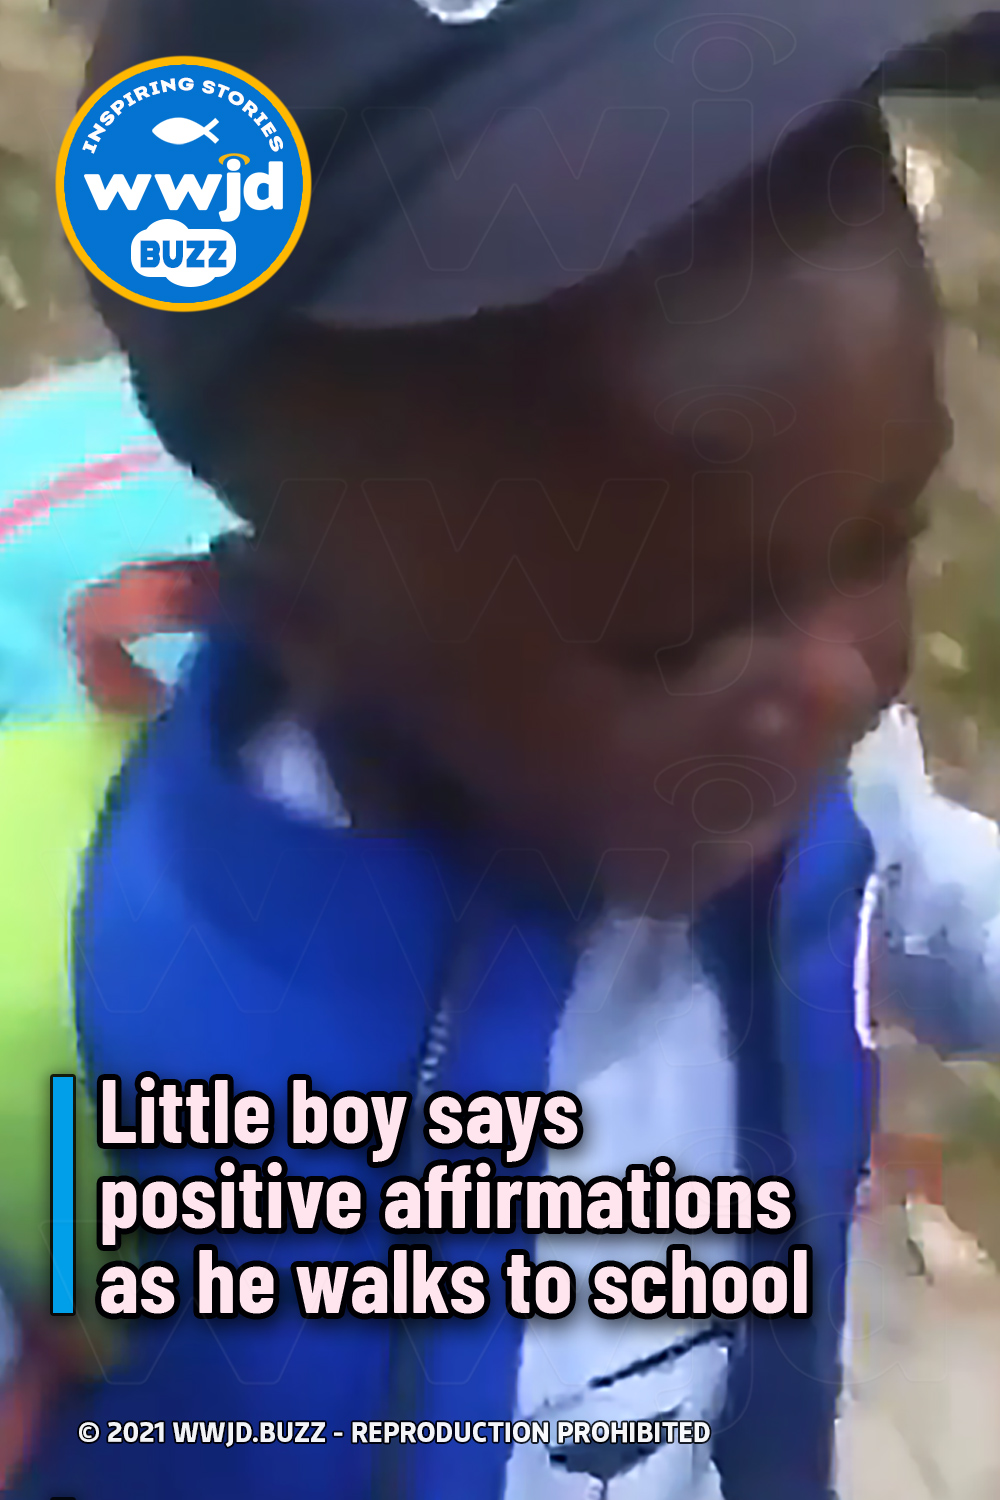 Little boy says positive affirmations as he walks to school